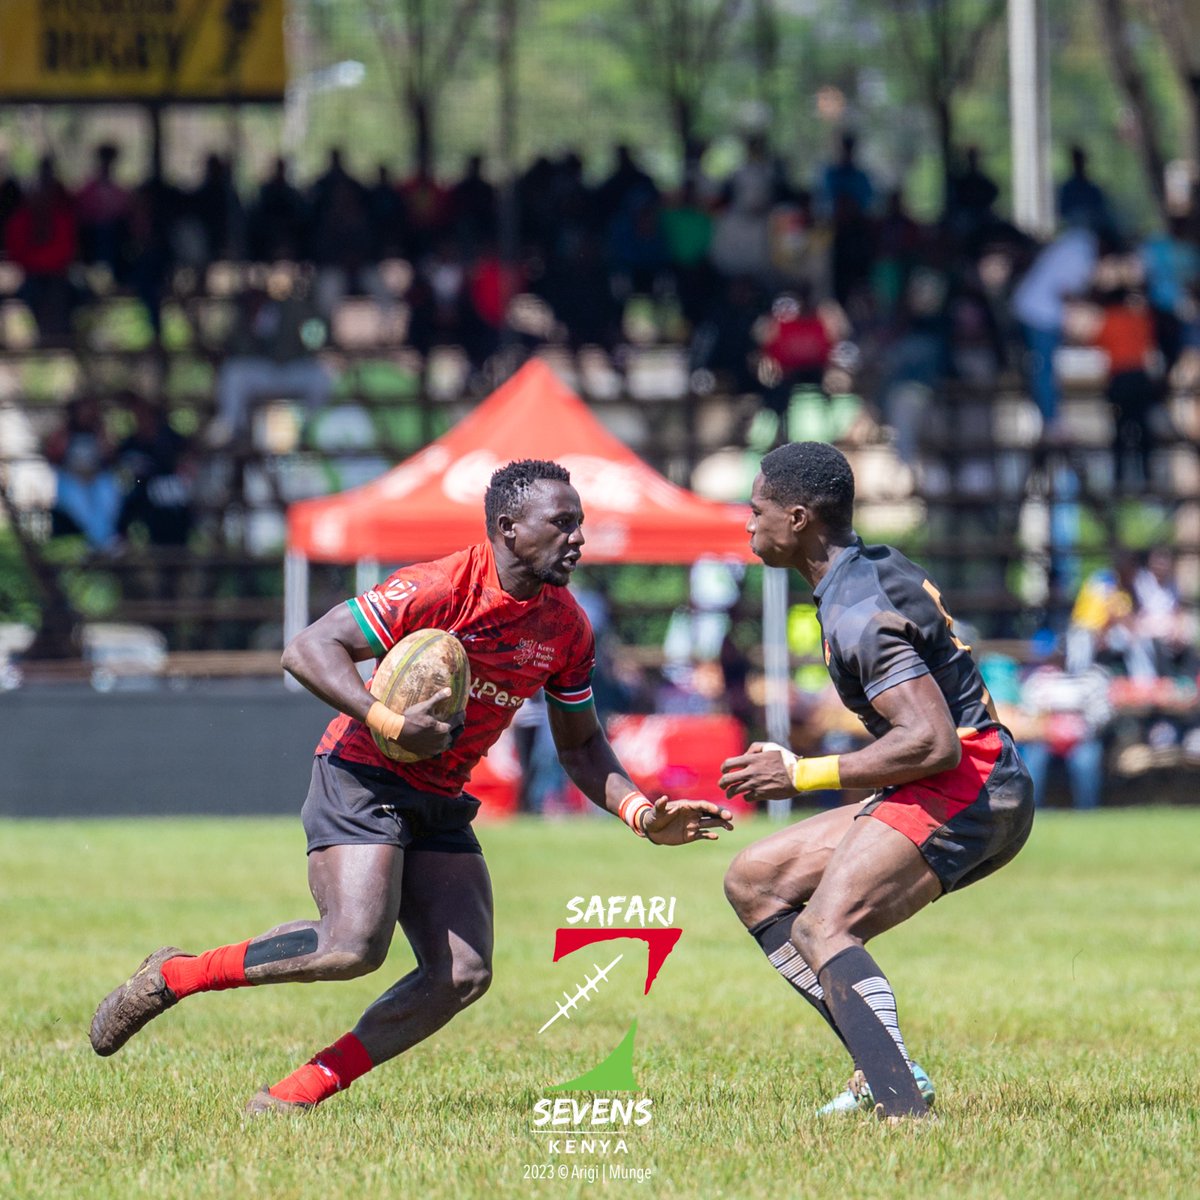 UPDATE: Dates for the 2024 Safari 7s confirmed for 11-13 October in Nairobi. Keep it here for more details in subsequent posts. #Safari7s